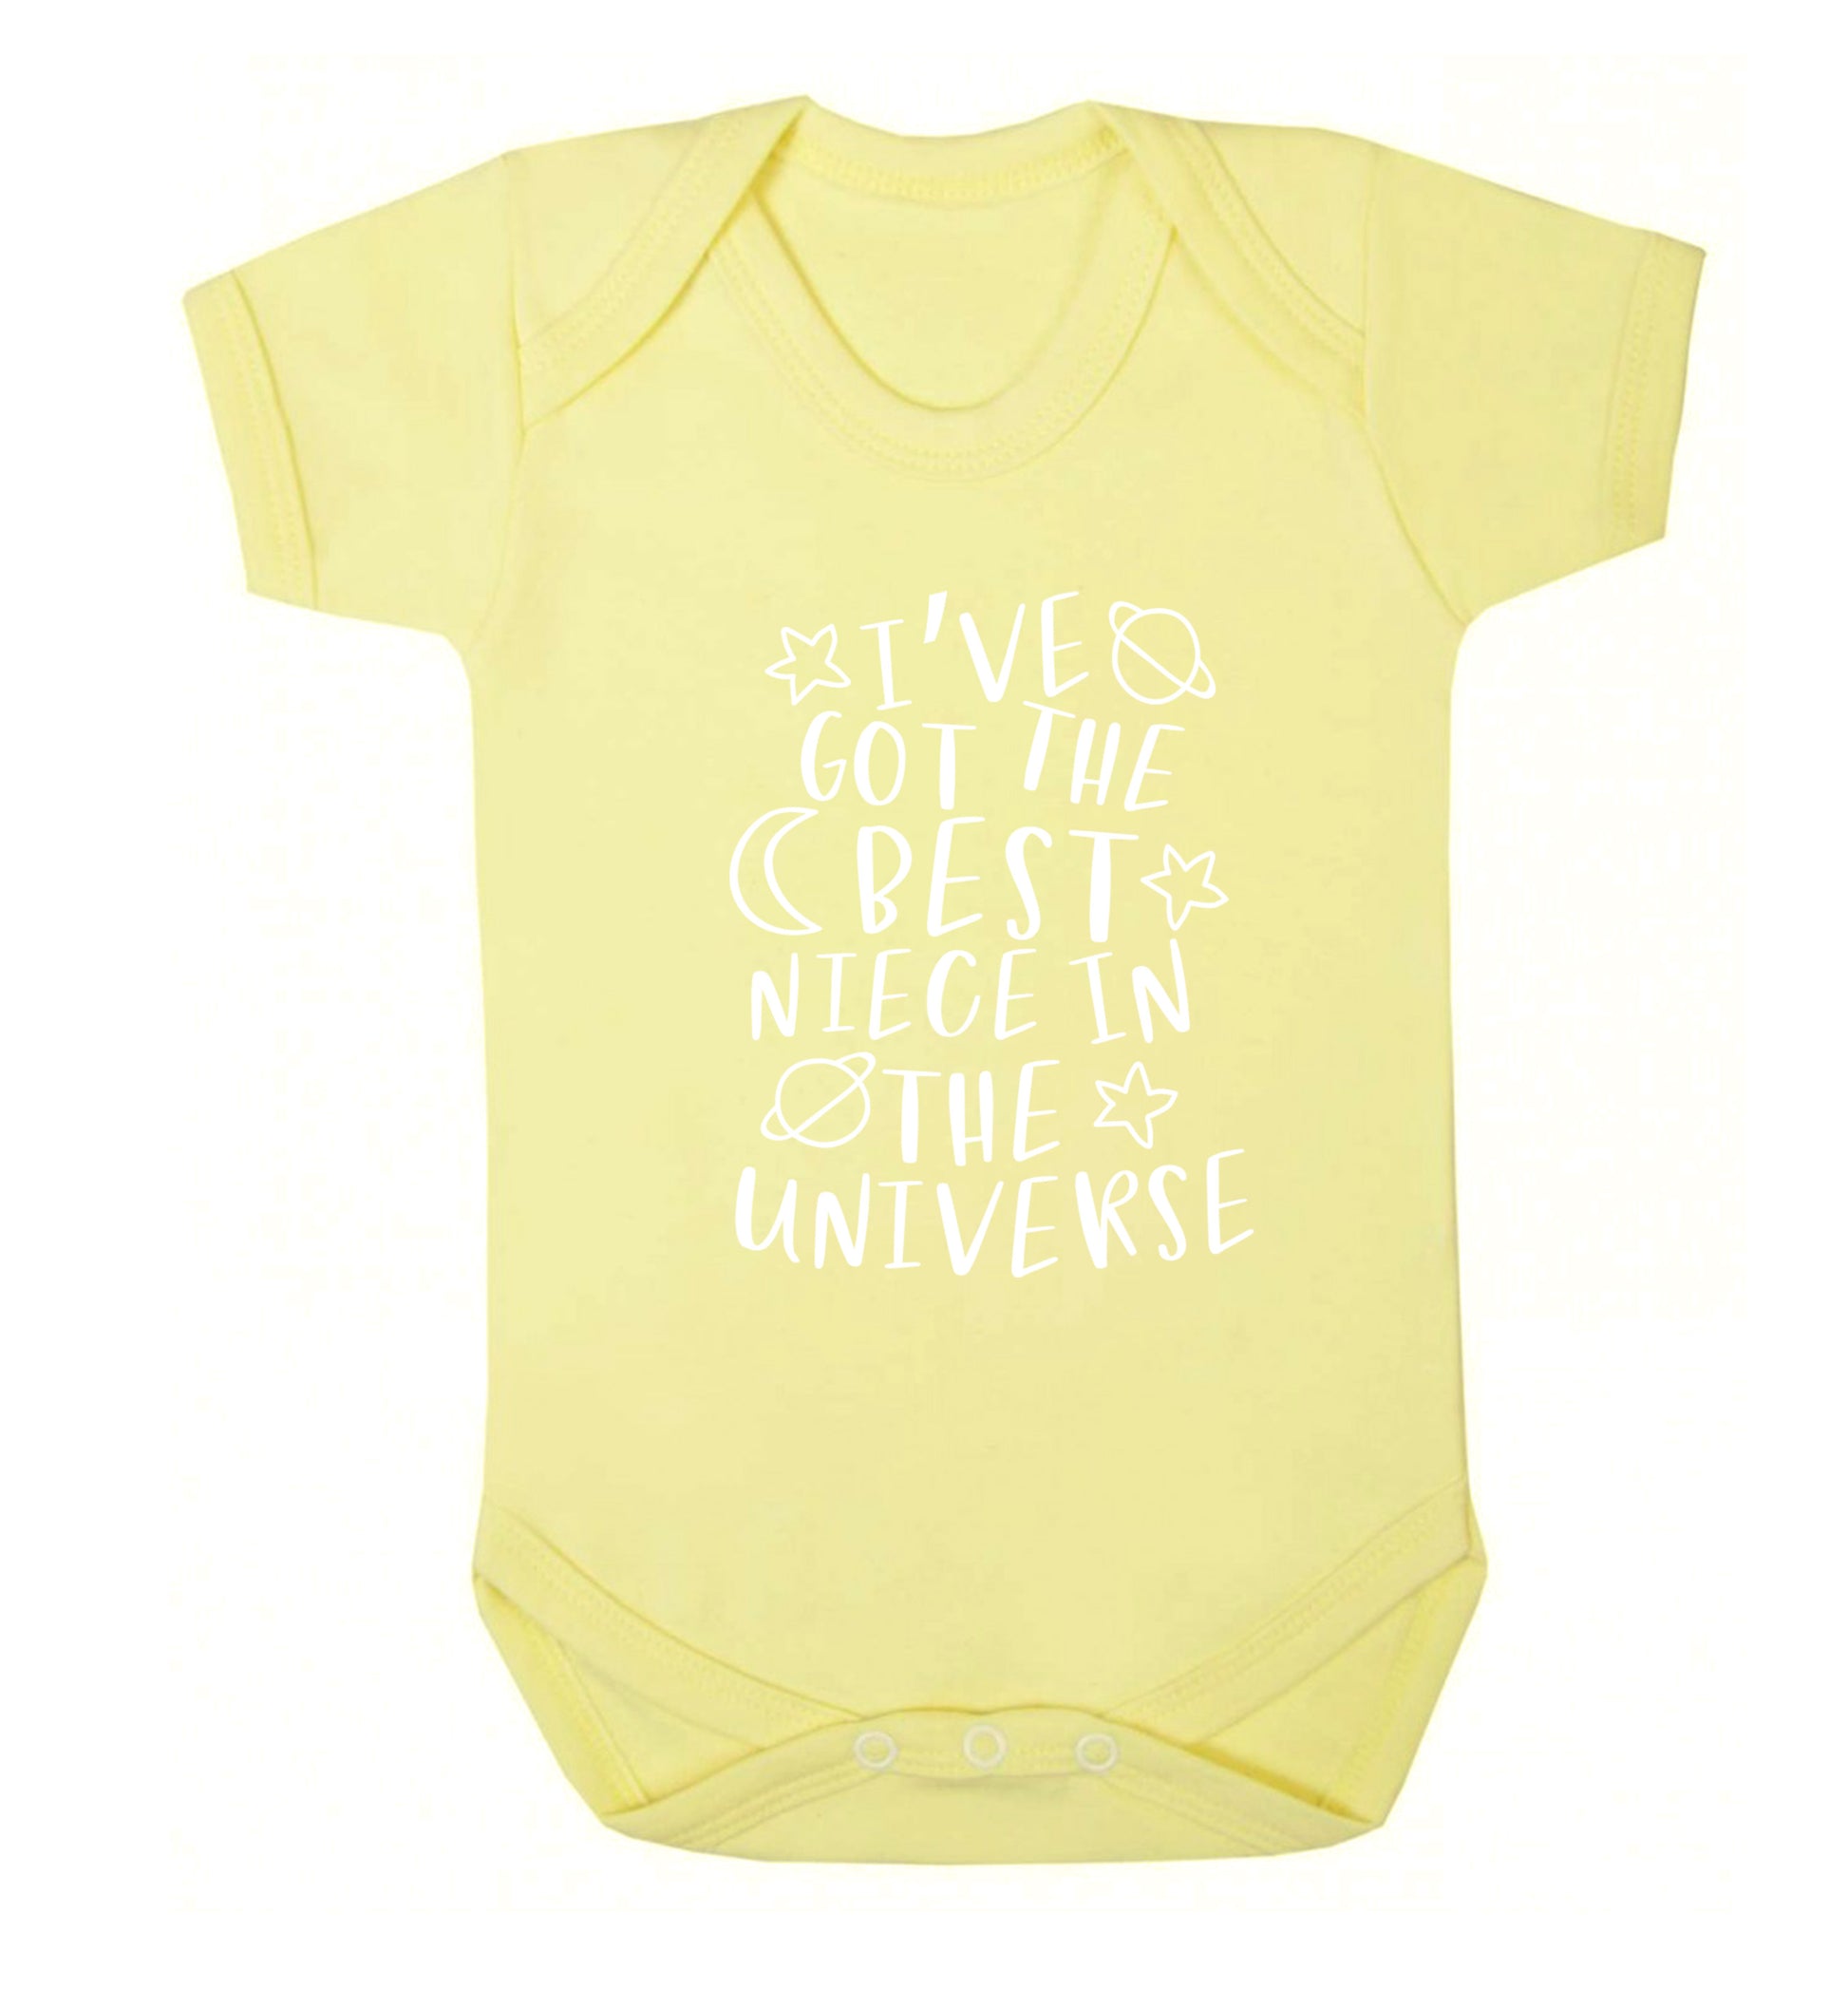 I've got the best niece in the universe Baby Vest pale yellow 18-24 months